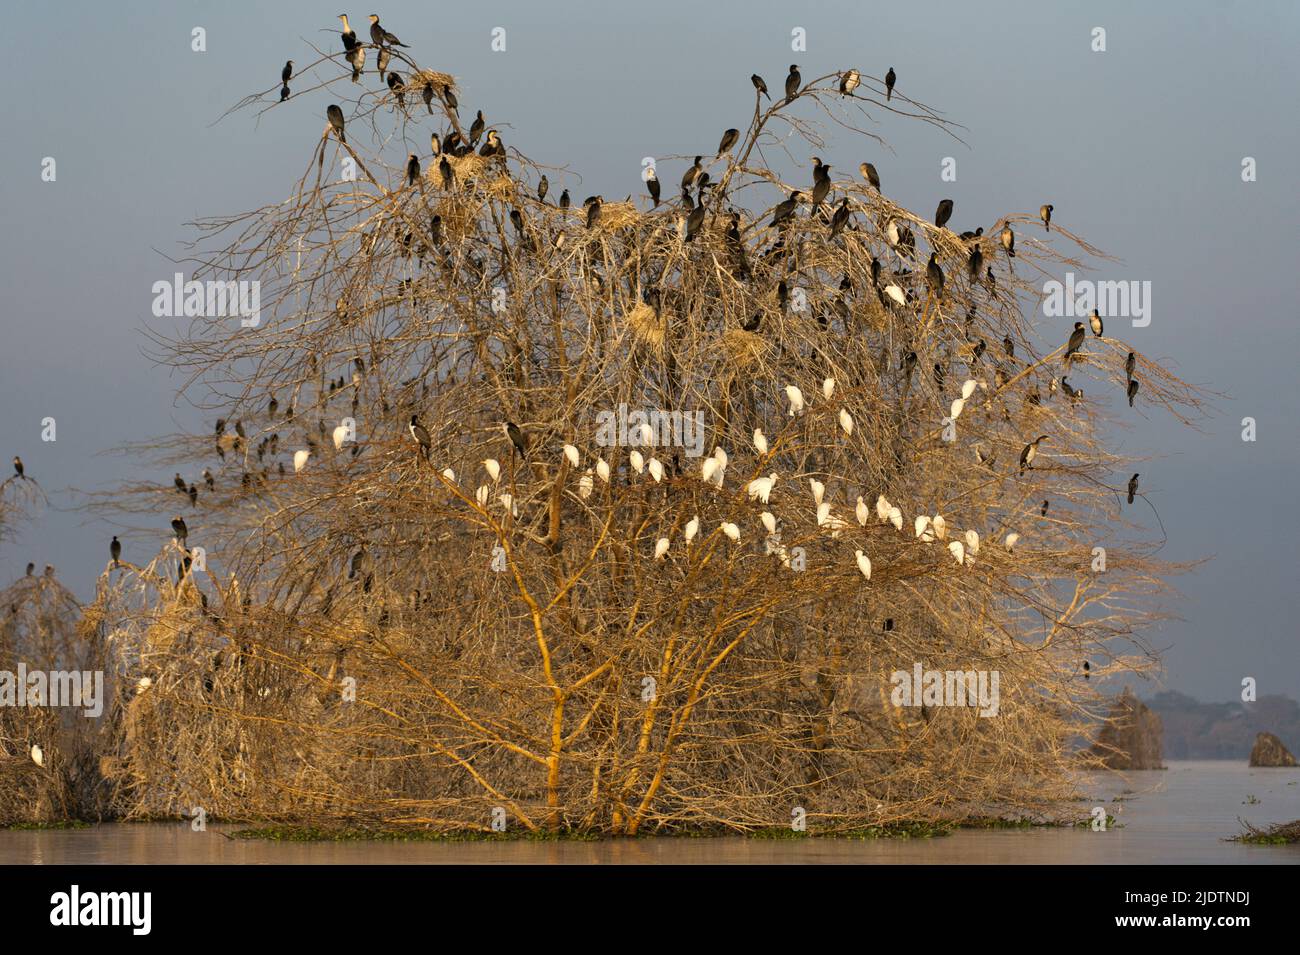 Flooded acasia tree serves as a resting place for cattle egrets and great cormorants in Lake Naivasha, Kenya. Stock Photo